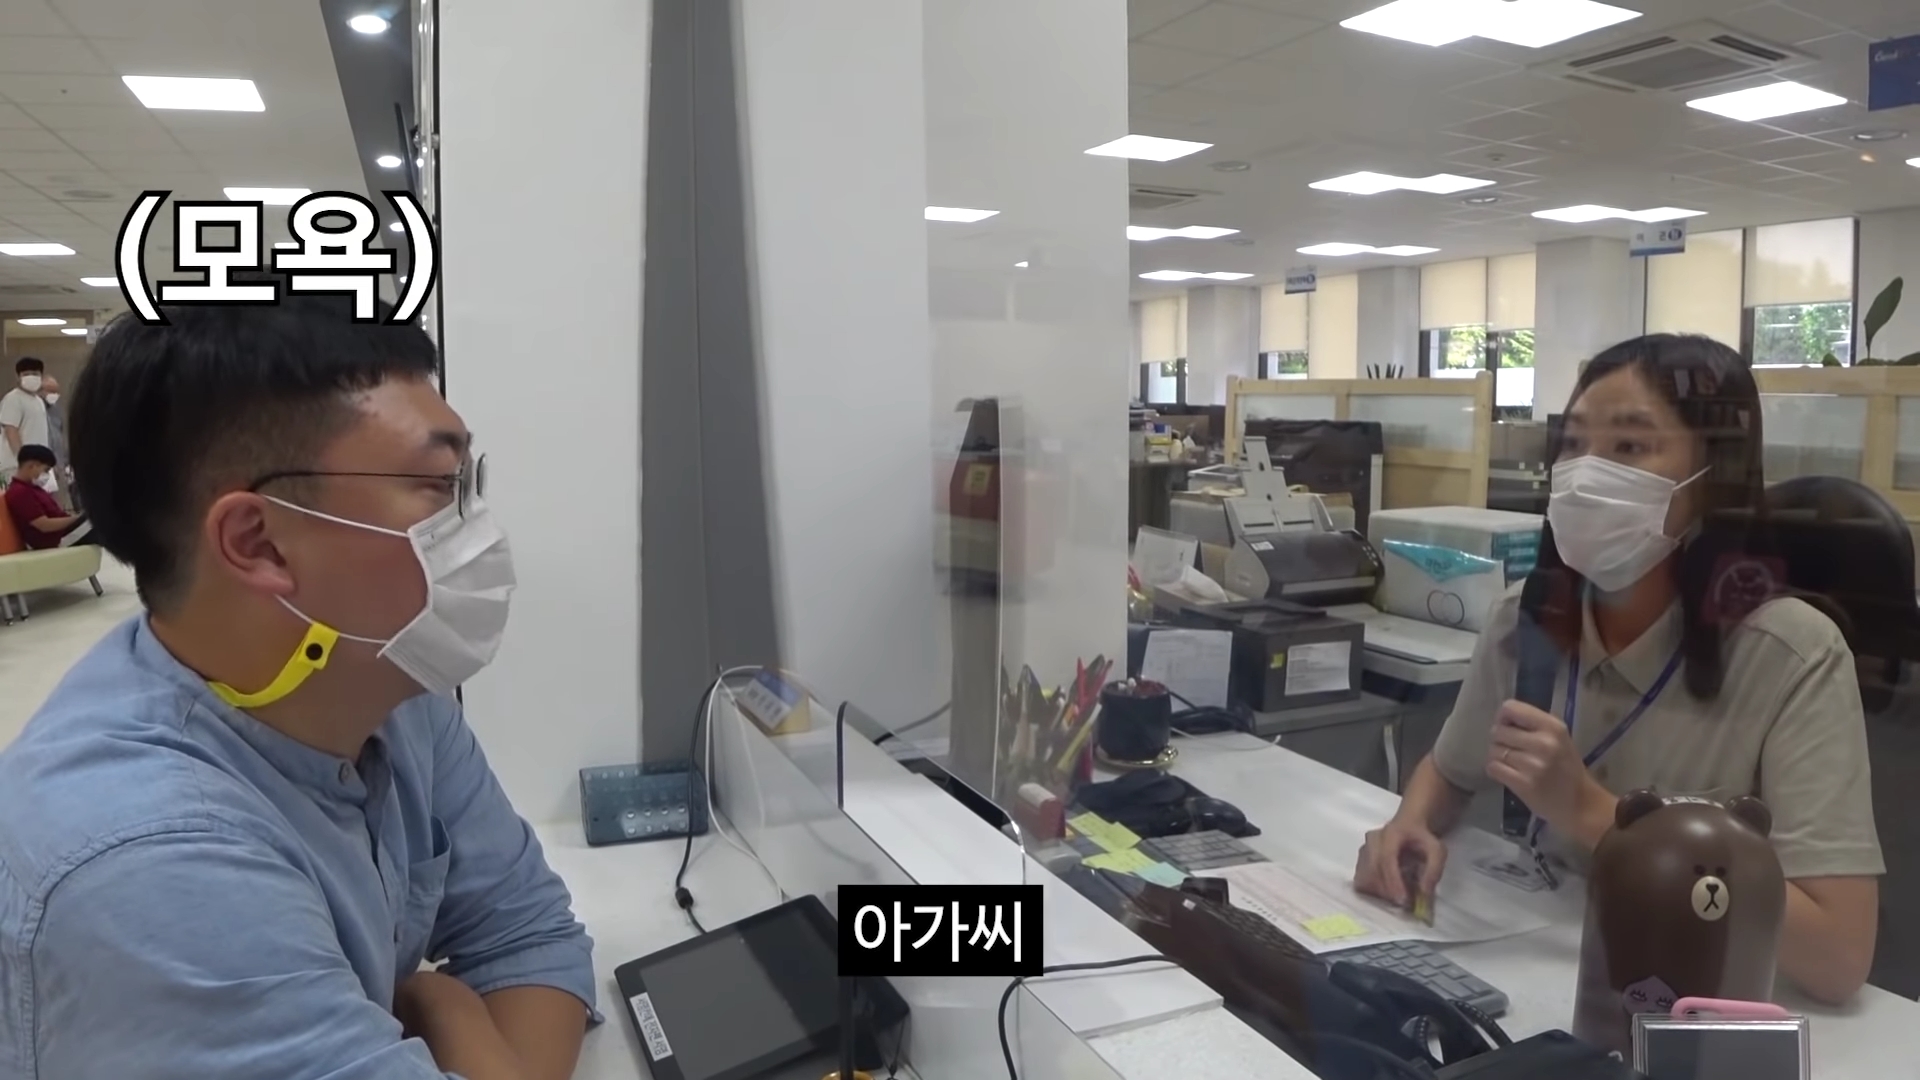 Youtube) The method acting of Chungju City officials